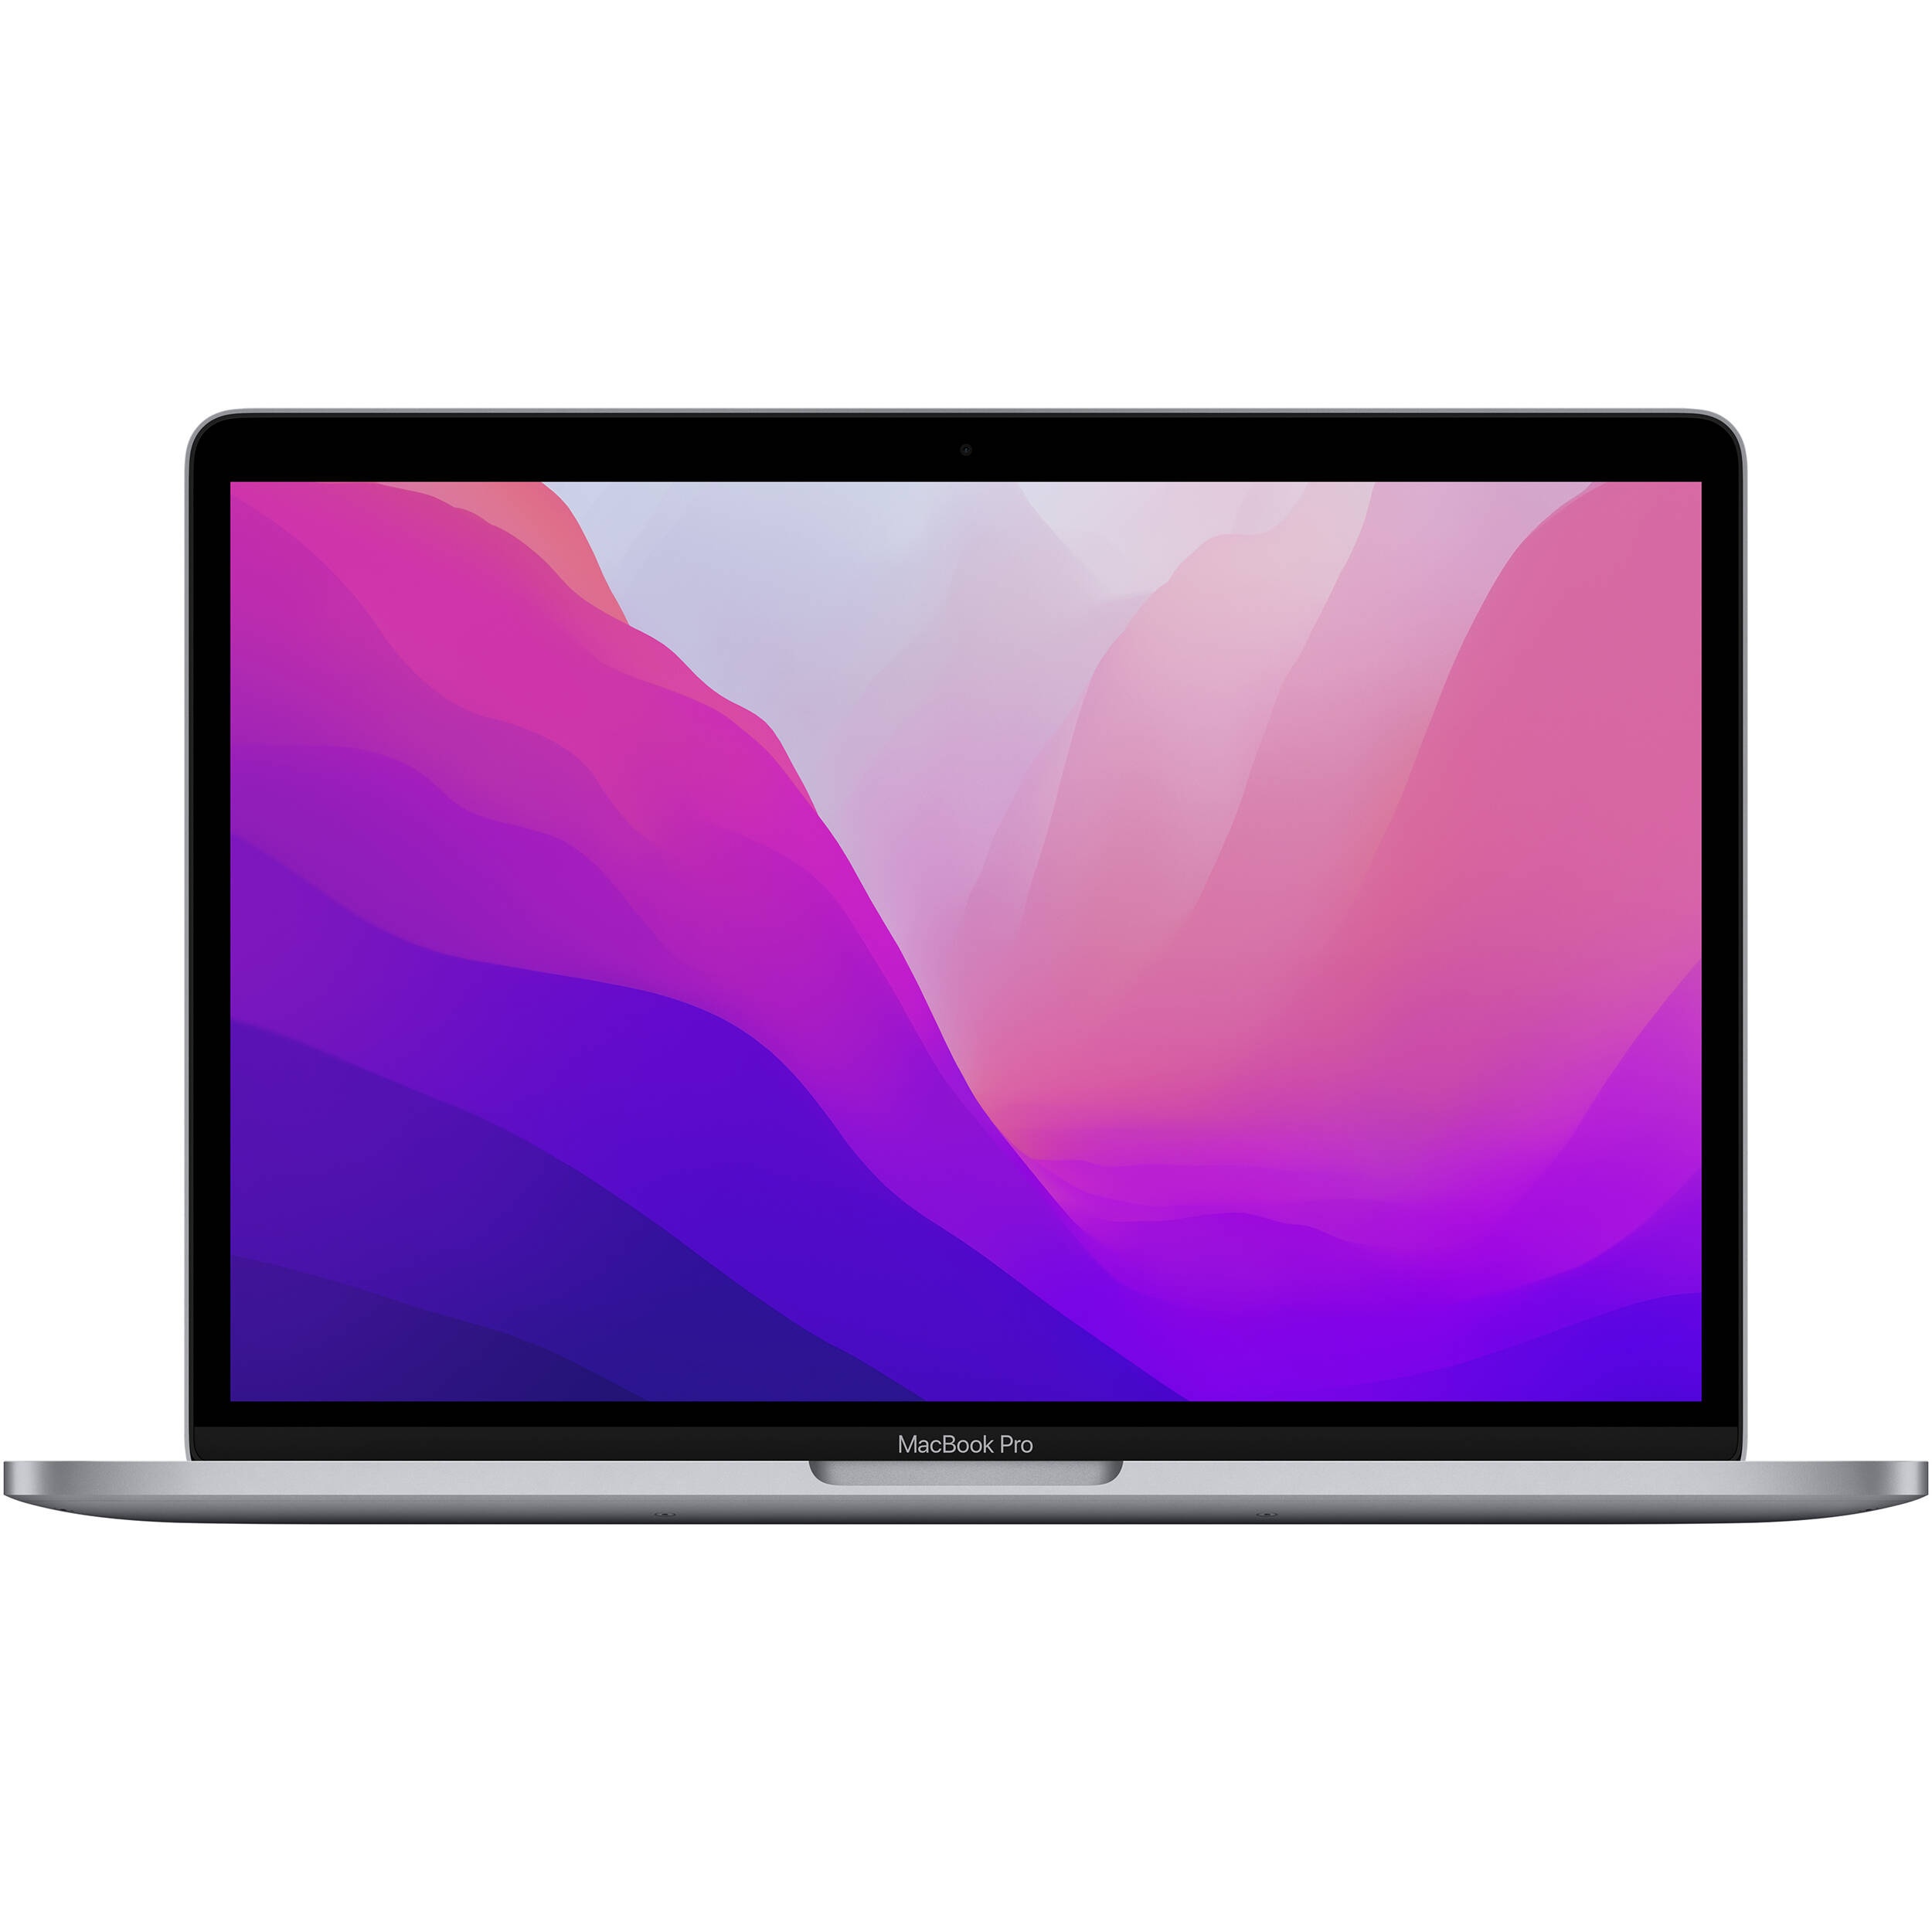 13-inch MacBook Pro: Apple M2 chip with 8-core CPU and 10-core GPU, 256GB SSD - Space Gray